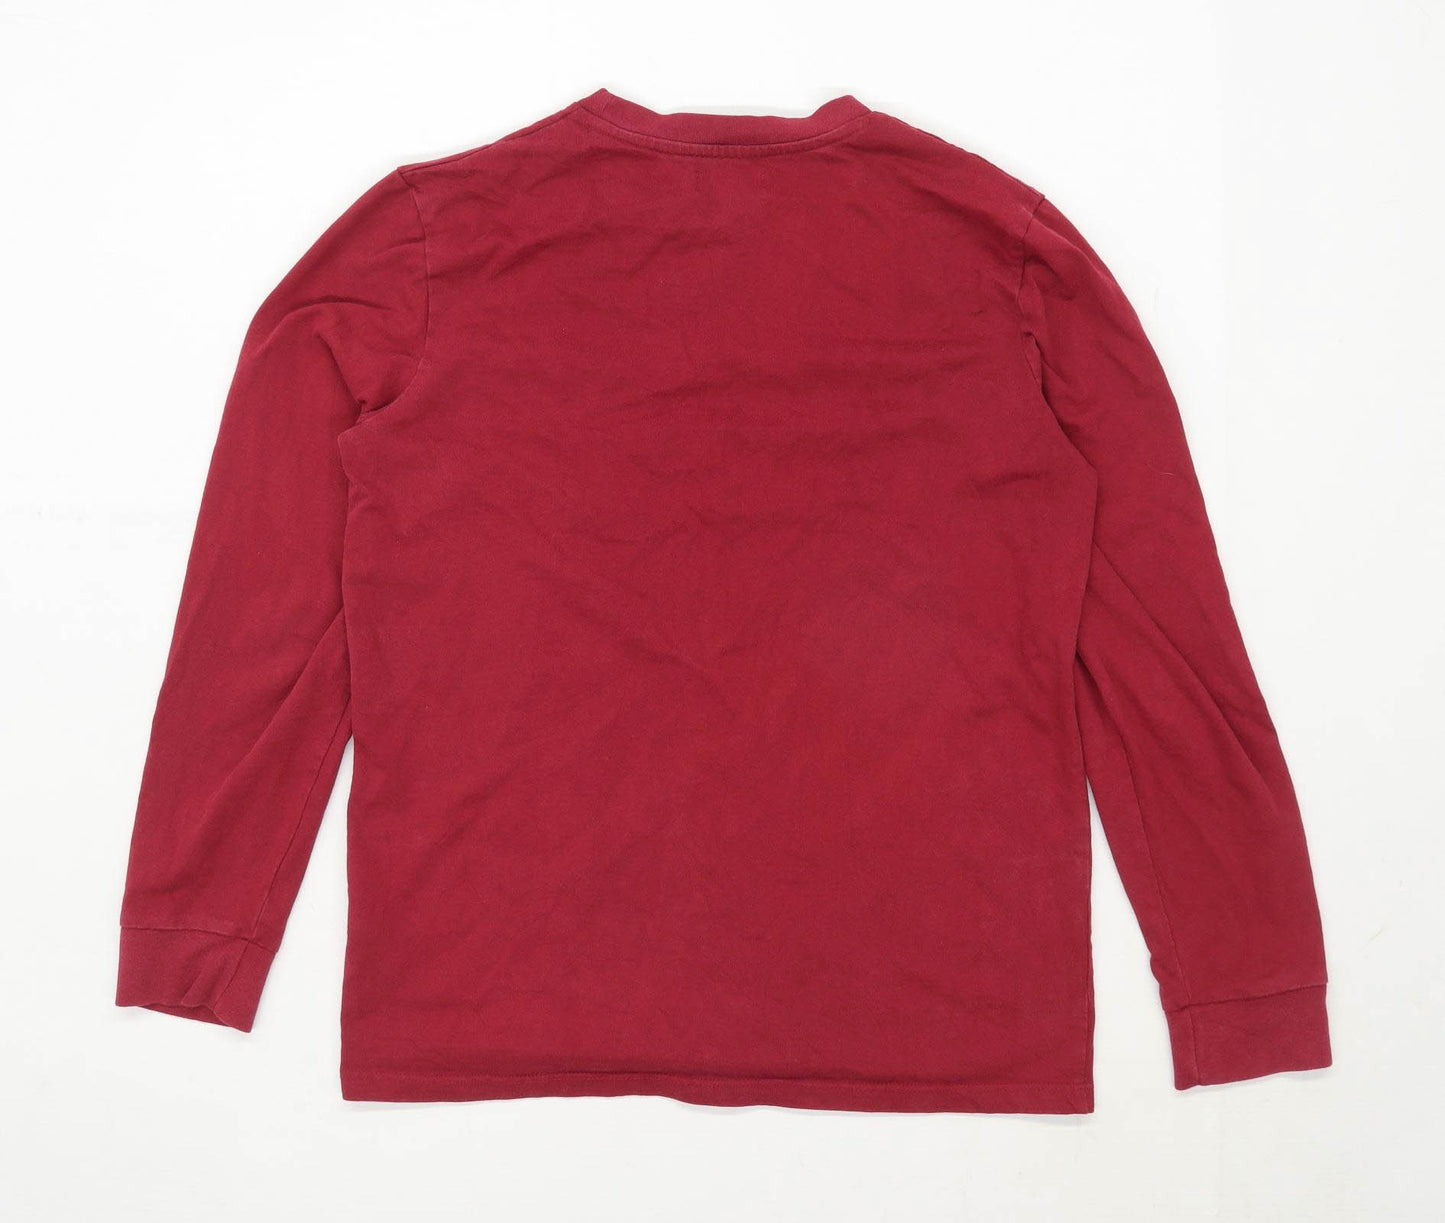 Topman Mens Size 2XS Cotton Red Top